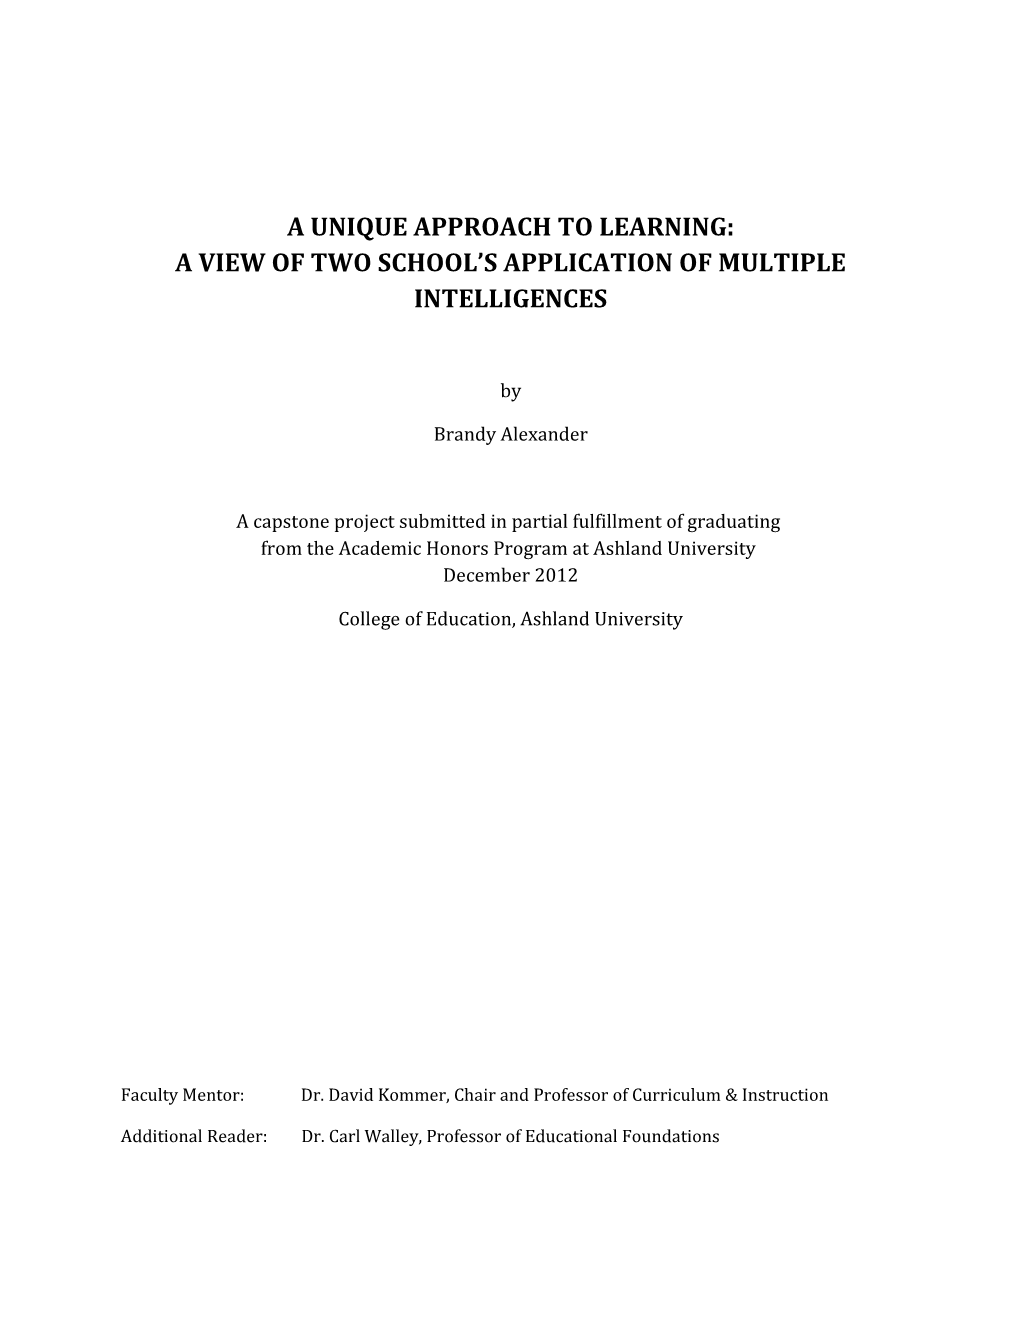 A Unique Approach to Learning: a View of Two Schools Application of Multiple Intelligences 5